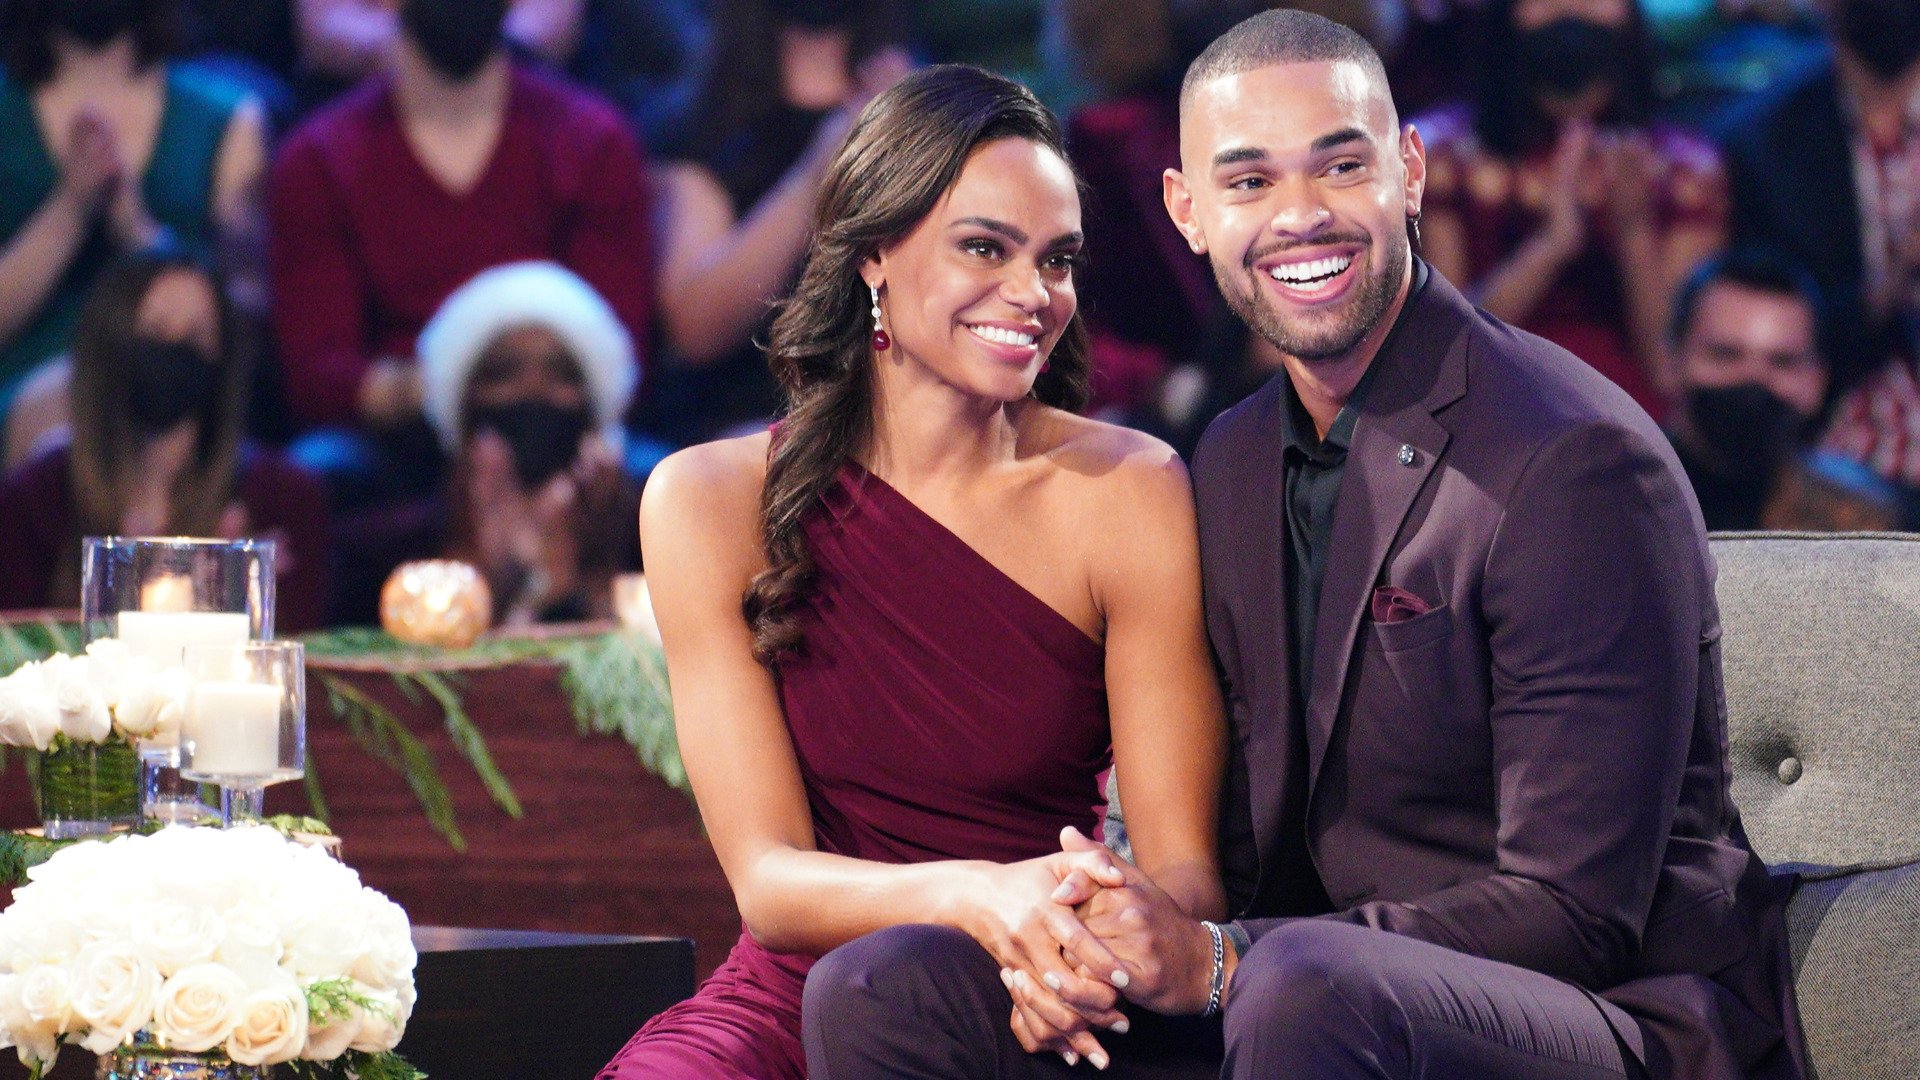 'The Bachelorette' couples who stayed together includes Michelle Young and Nate Olukoya from season 18, seen here during the finale.